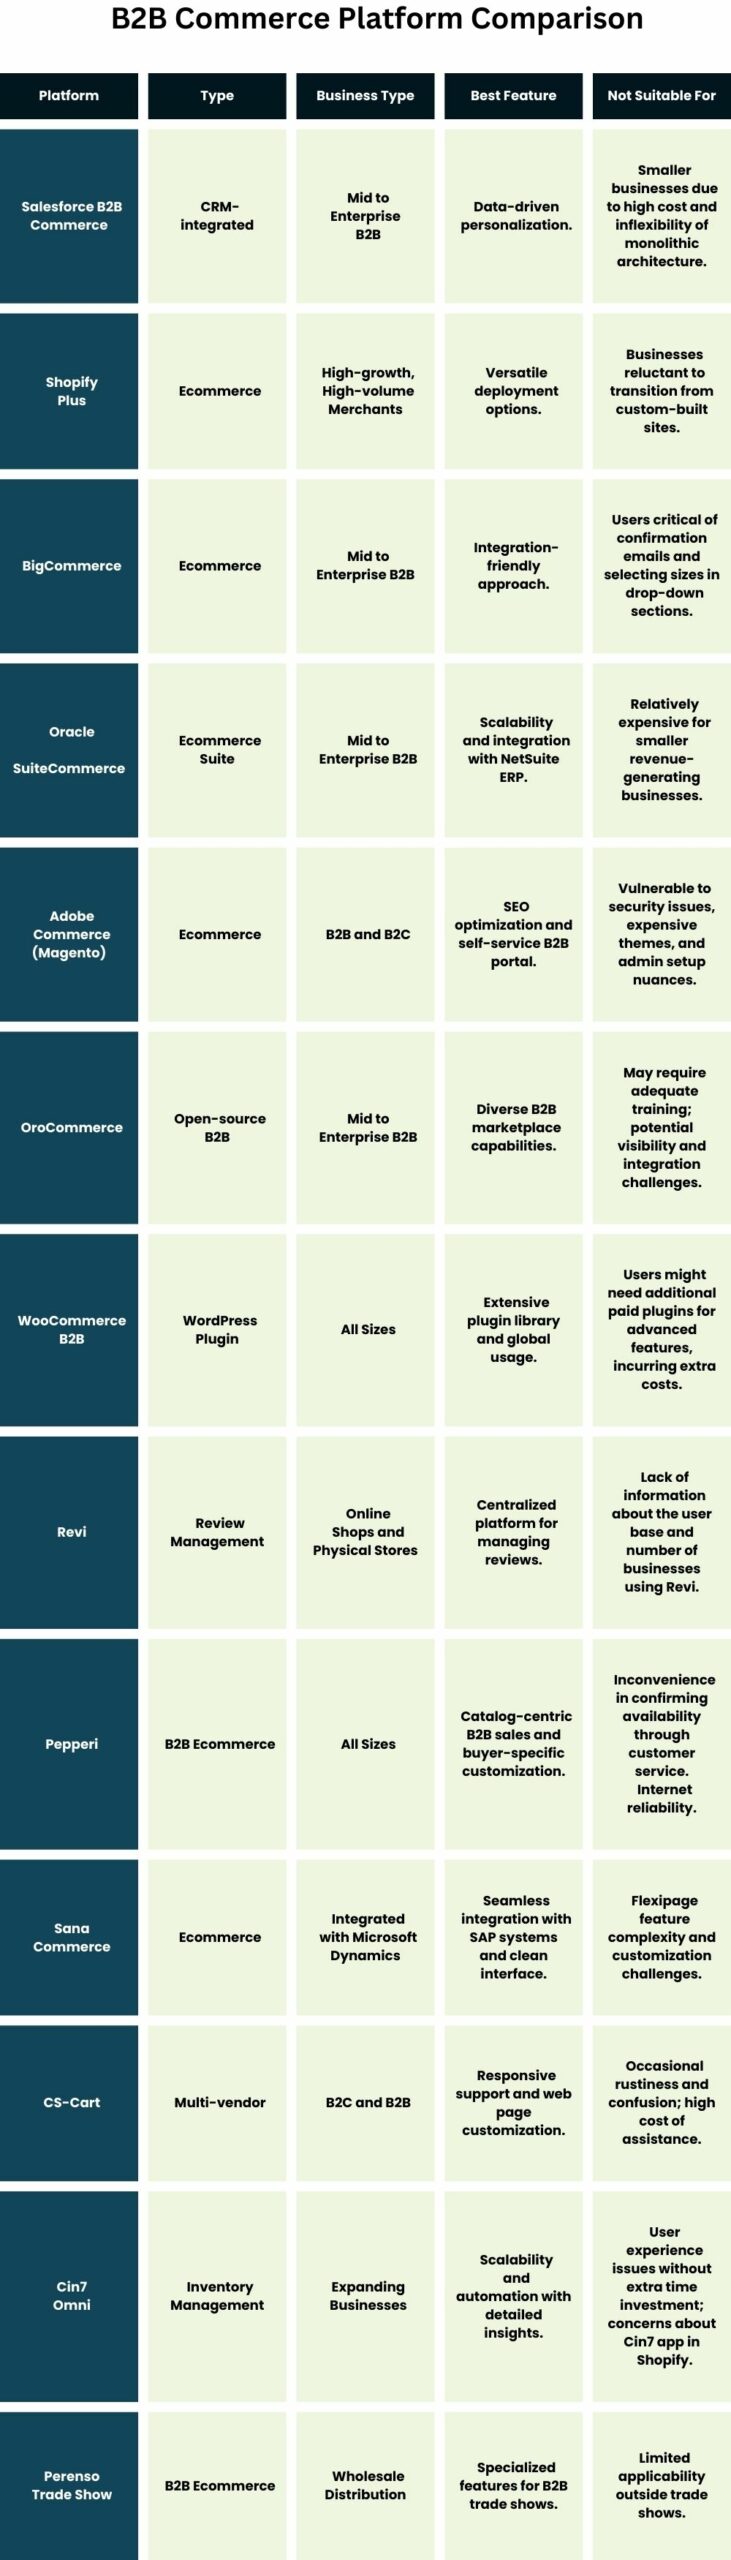 The table with all the platforms described on the page with comparison of the platforms' types, business types, best features and what the platforms are not suitable for.